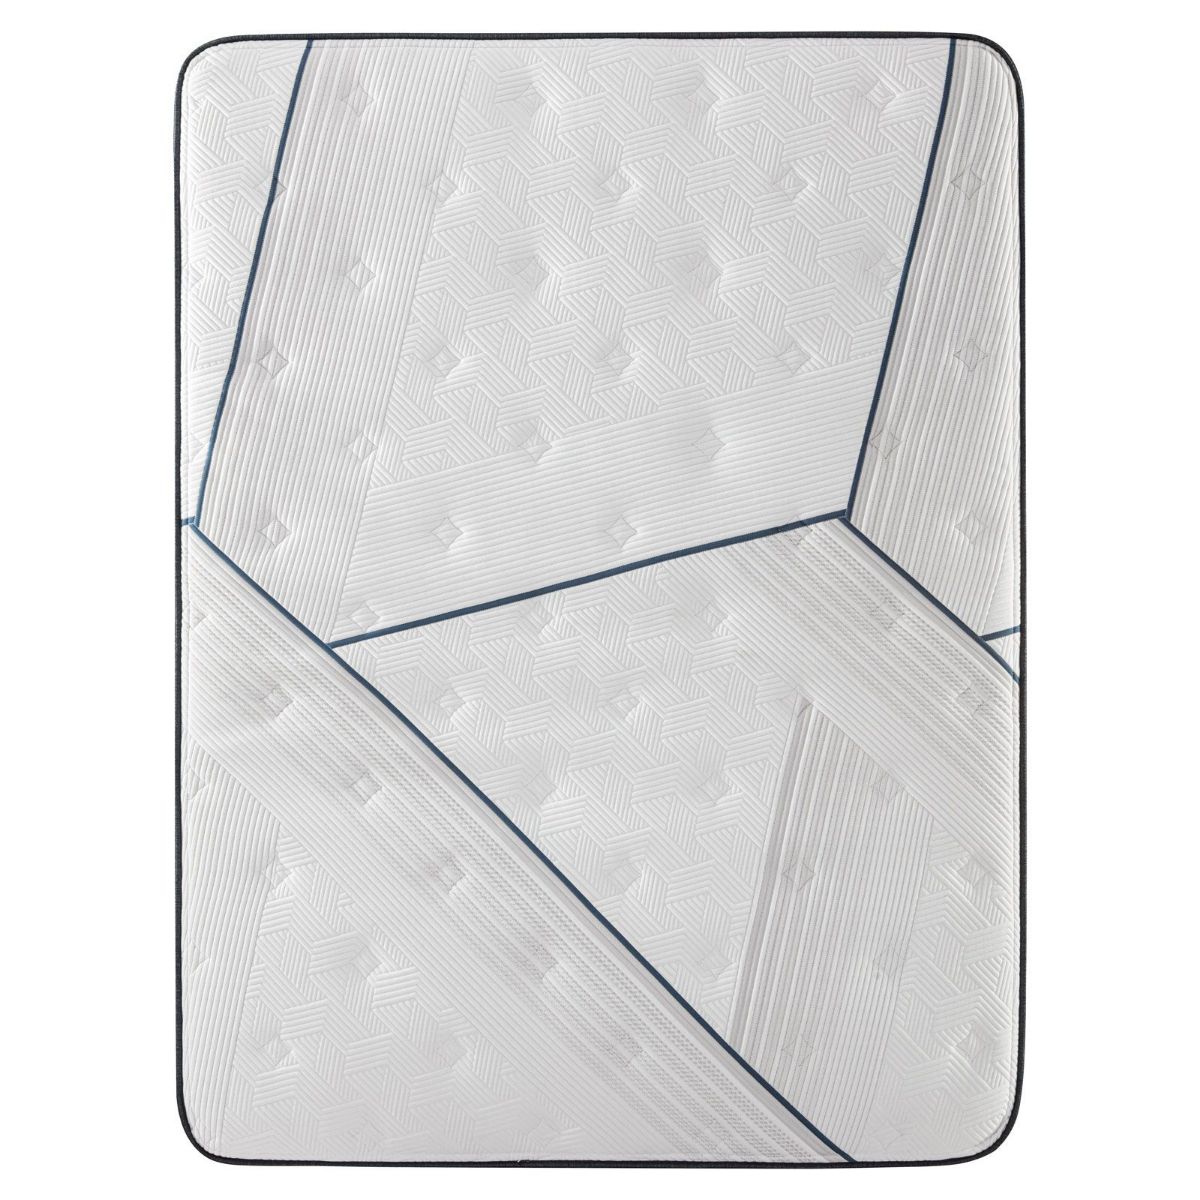 Picture of iComfort CF3000 Quilted Hybrid Pillow Top Queen Mattress